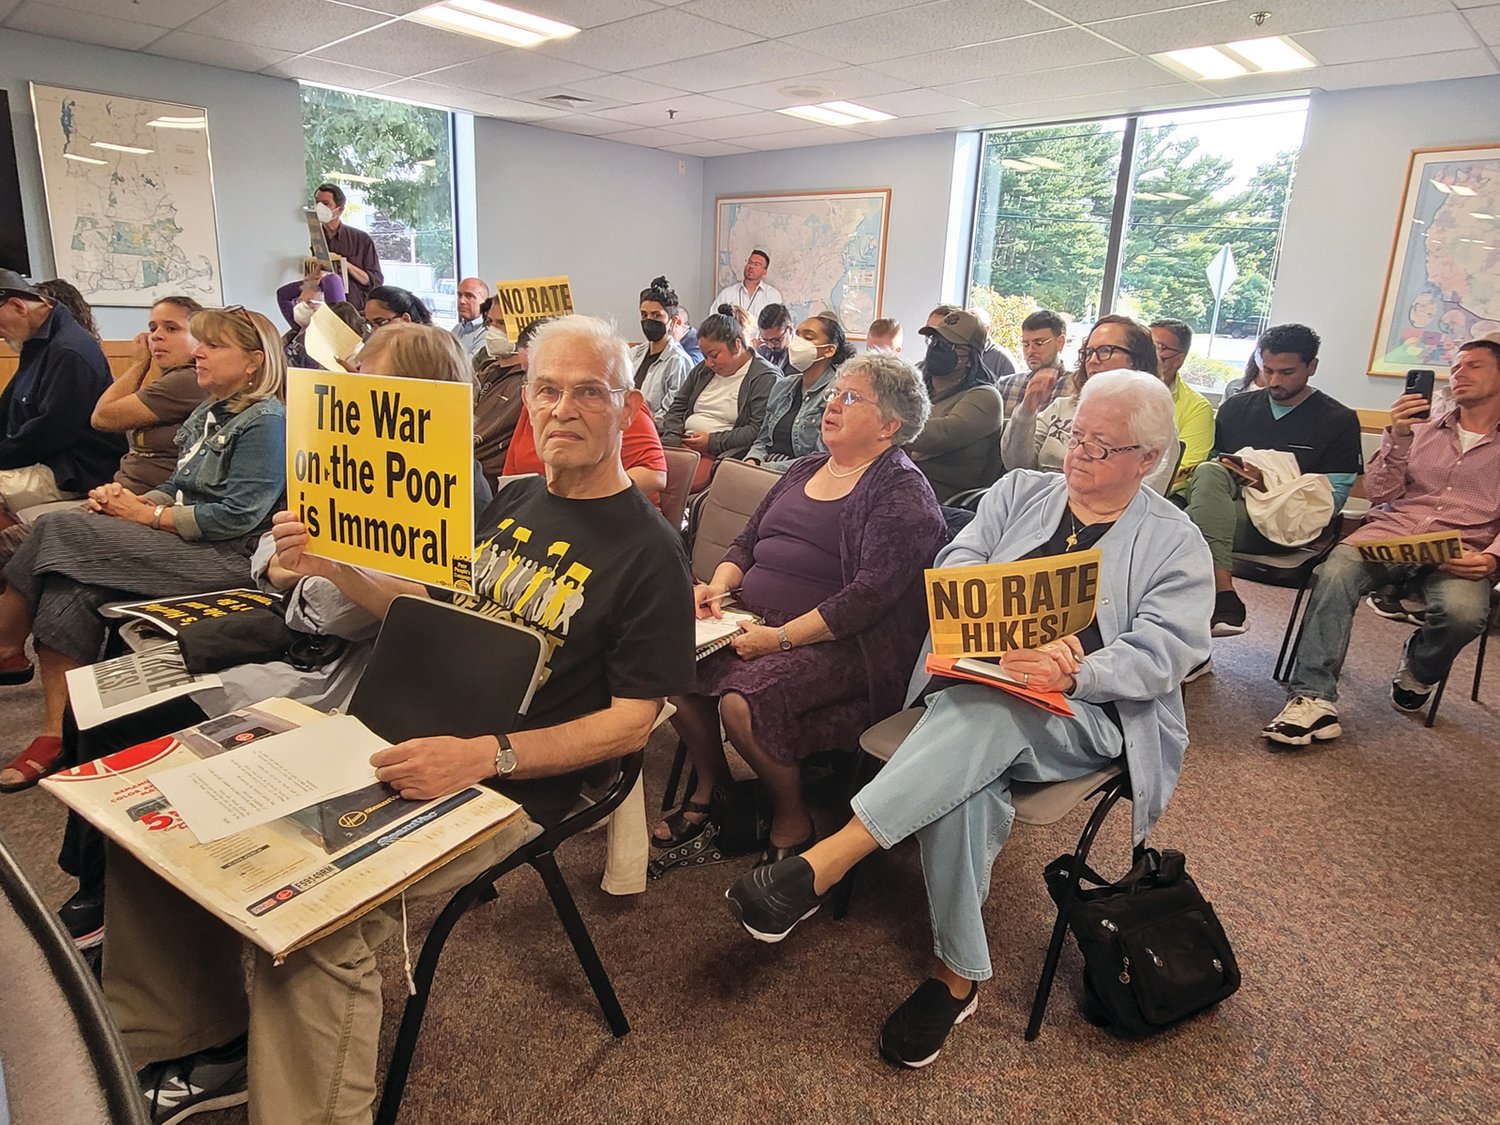 SIGNS OF PROTEST: Attendees at a public hearing on an increase in electricity rates held signs in protest. The hearing was held in Warwick before the state’s Division of Public Utilities and Carriers.